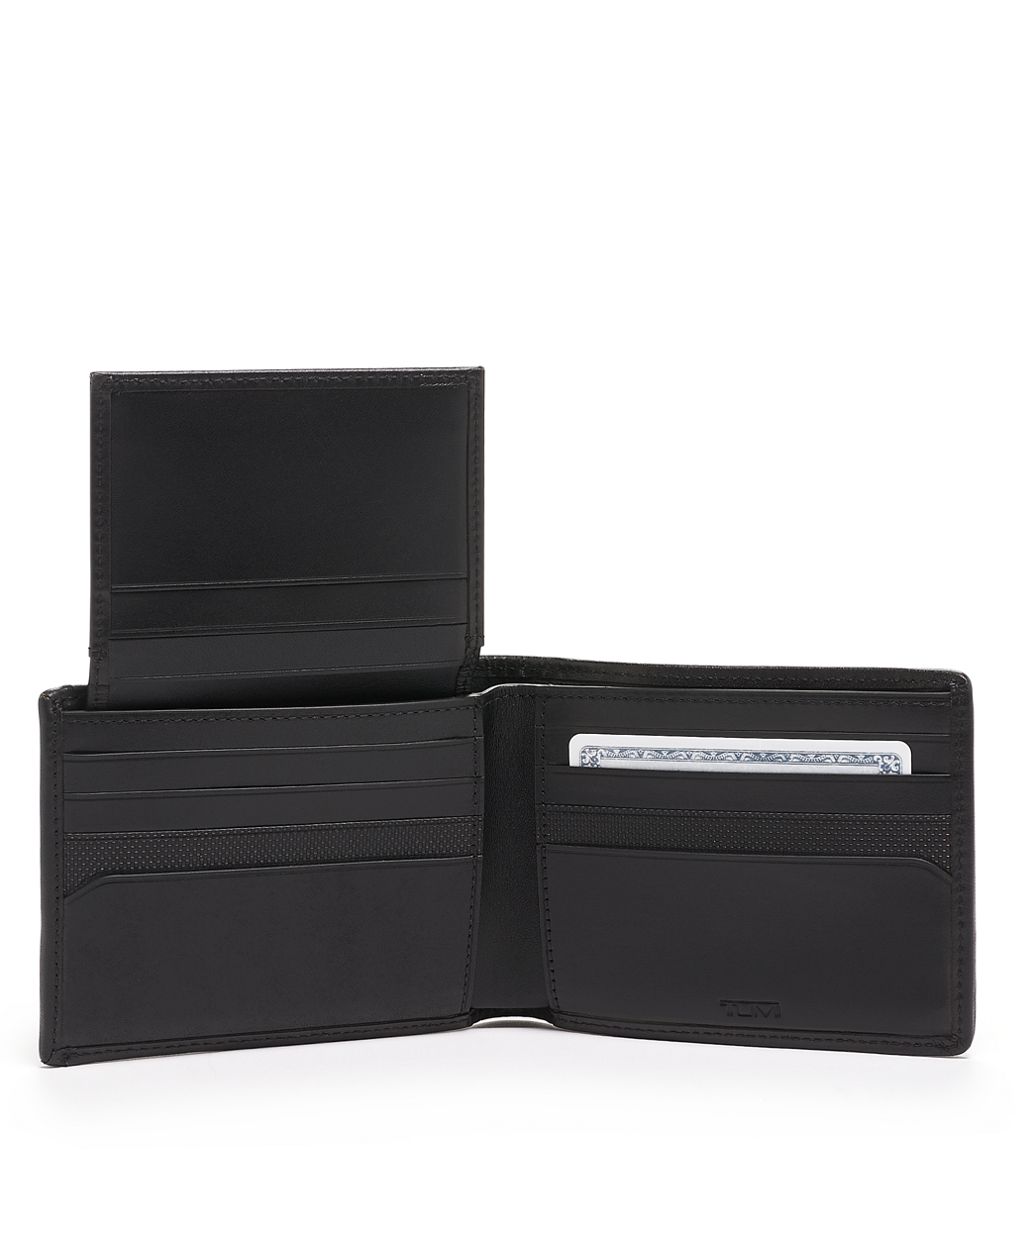 Global Removable Passcase | Tumi US